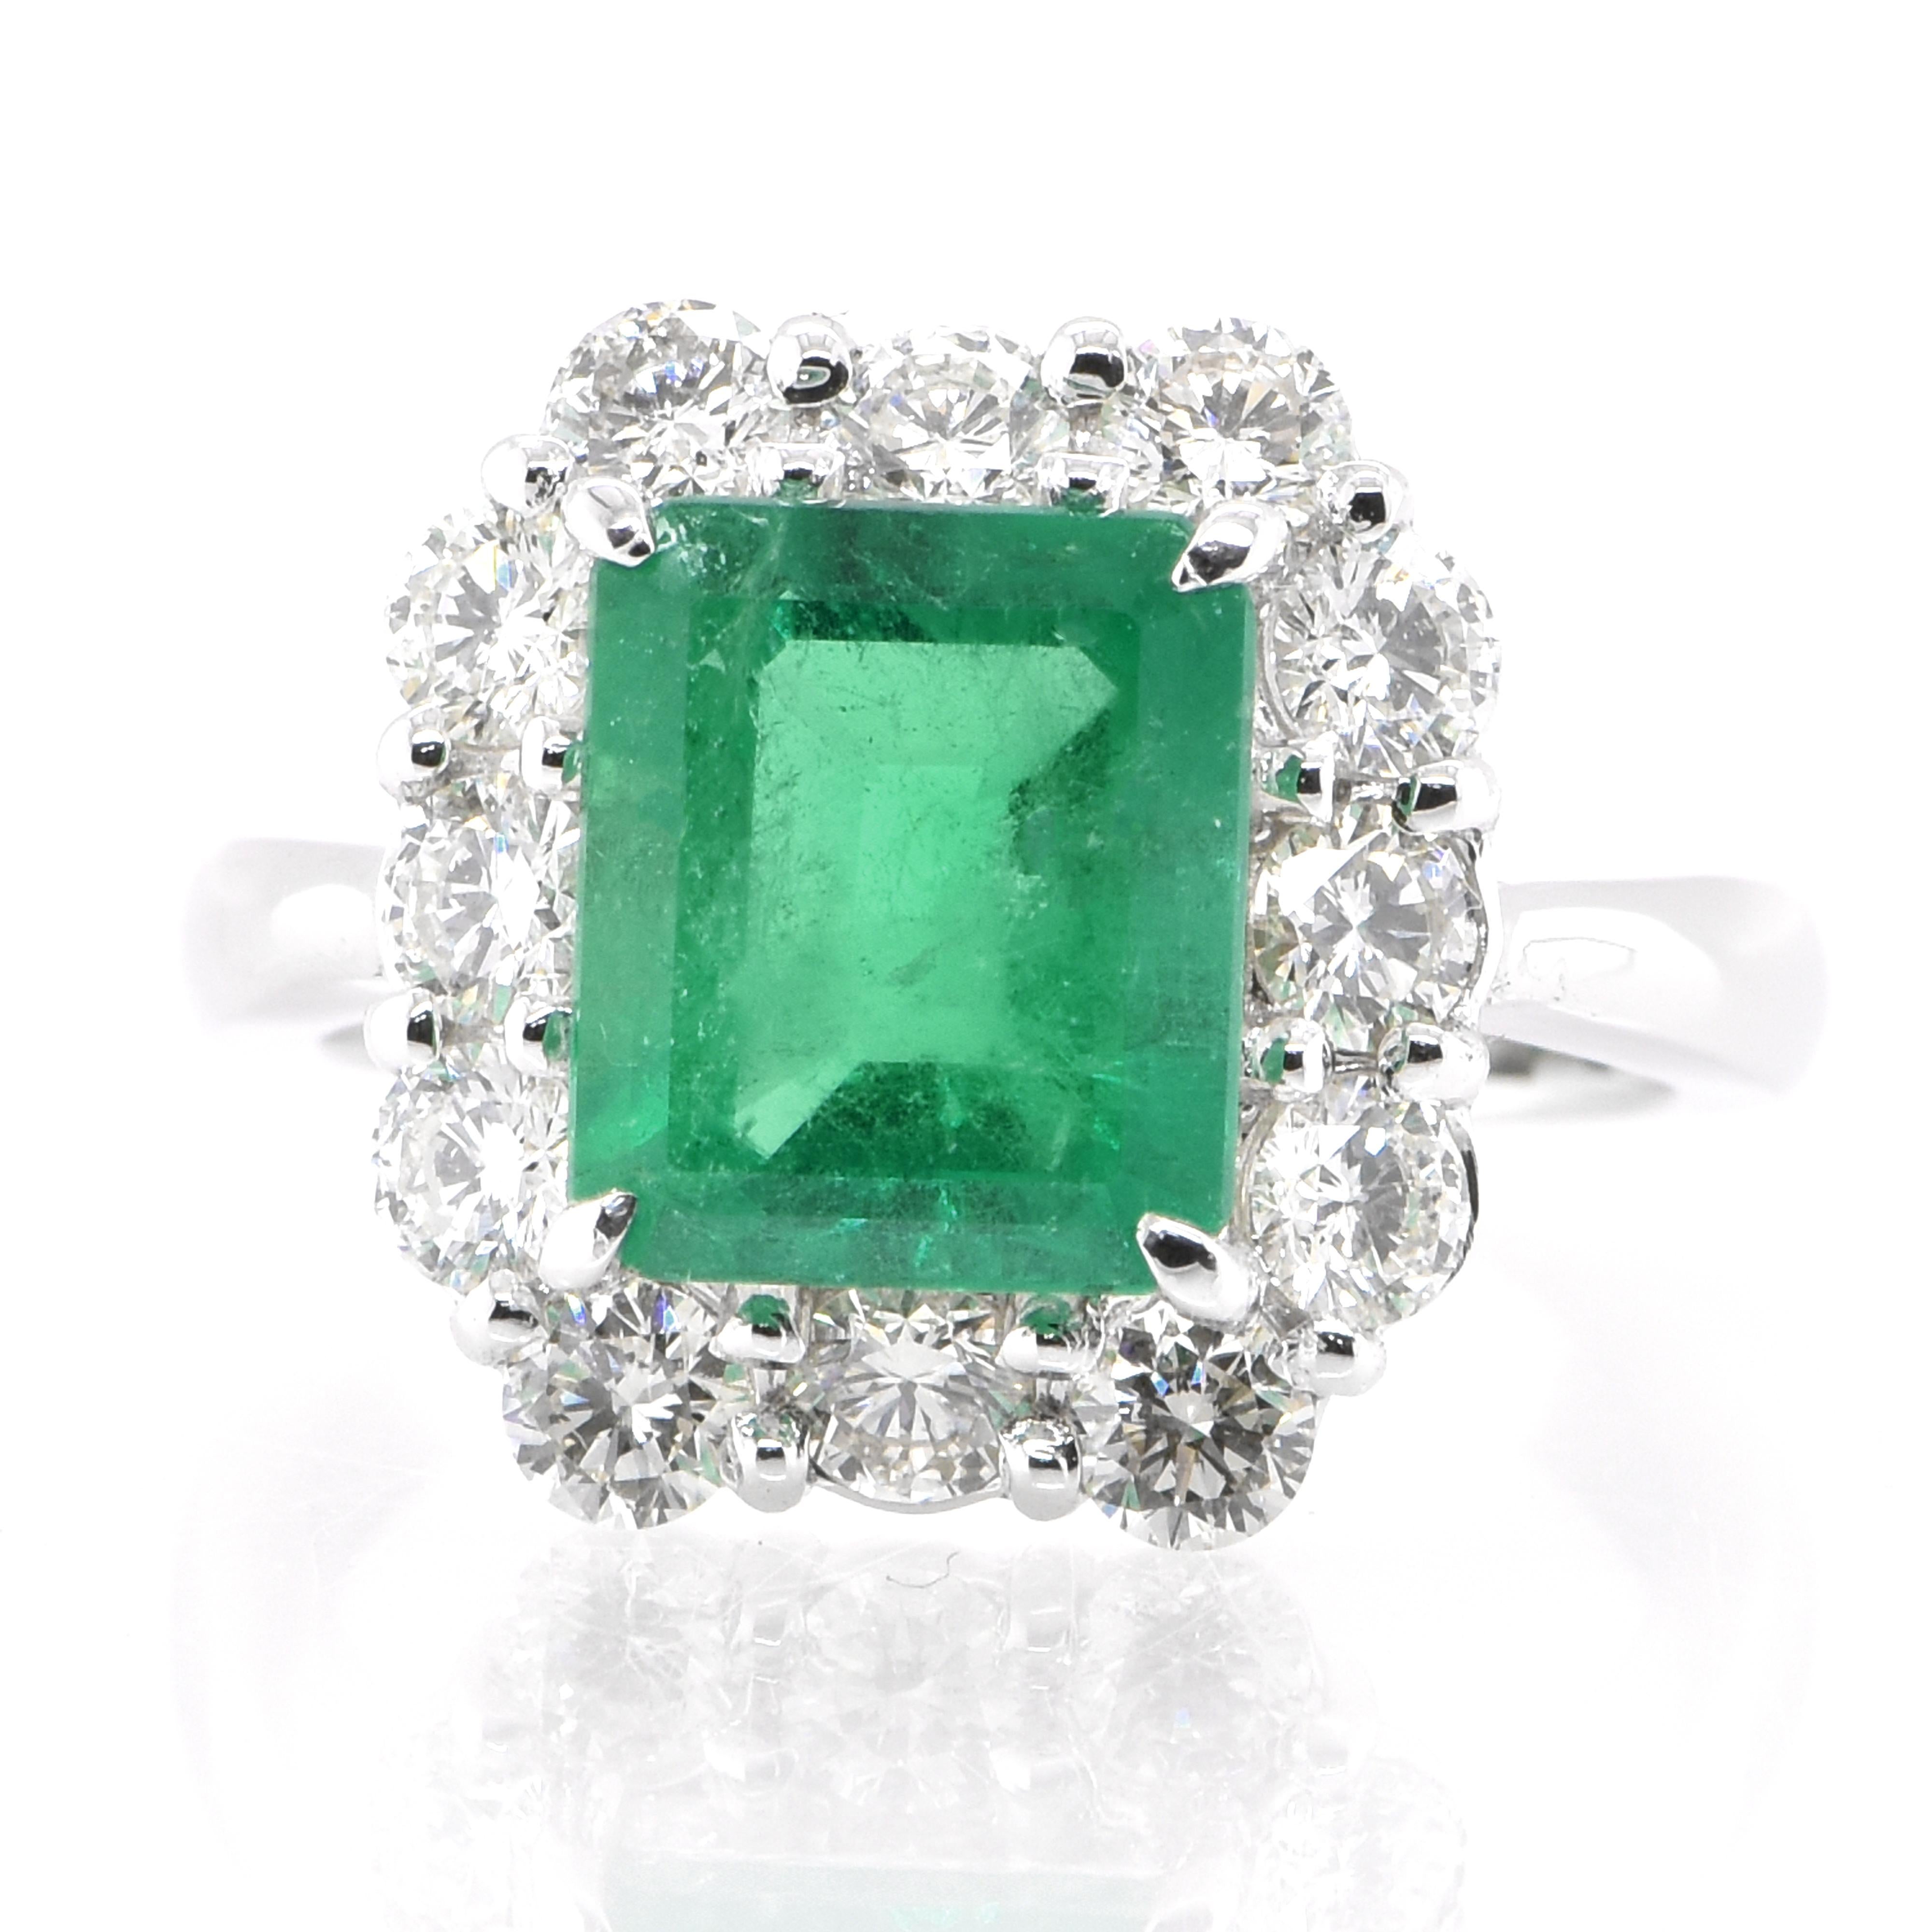 Modern 2.36 Carat Natural Colombian Emerald and Diamond Ring Set in Platinum